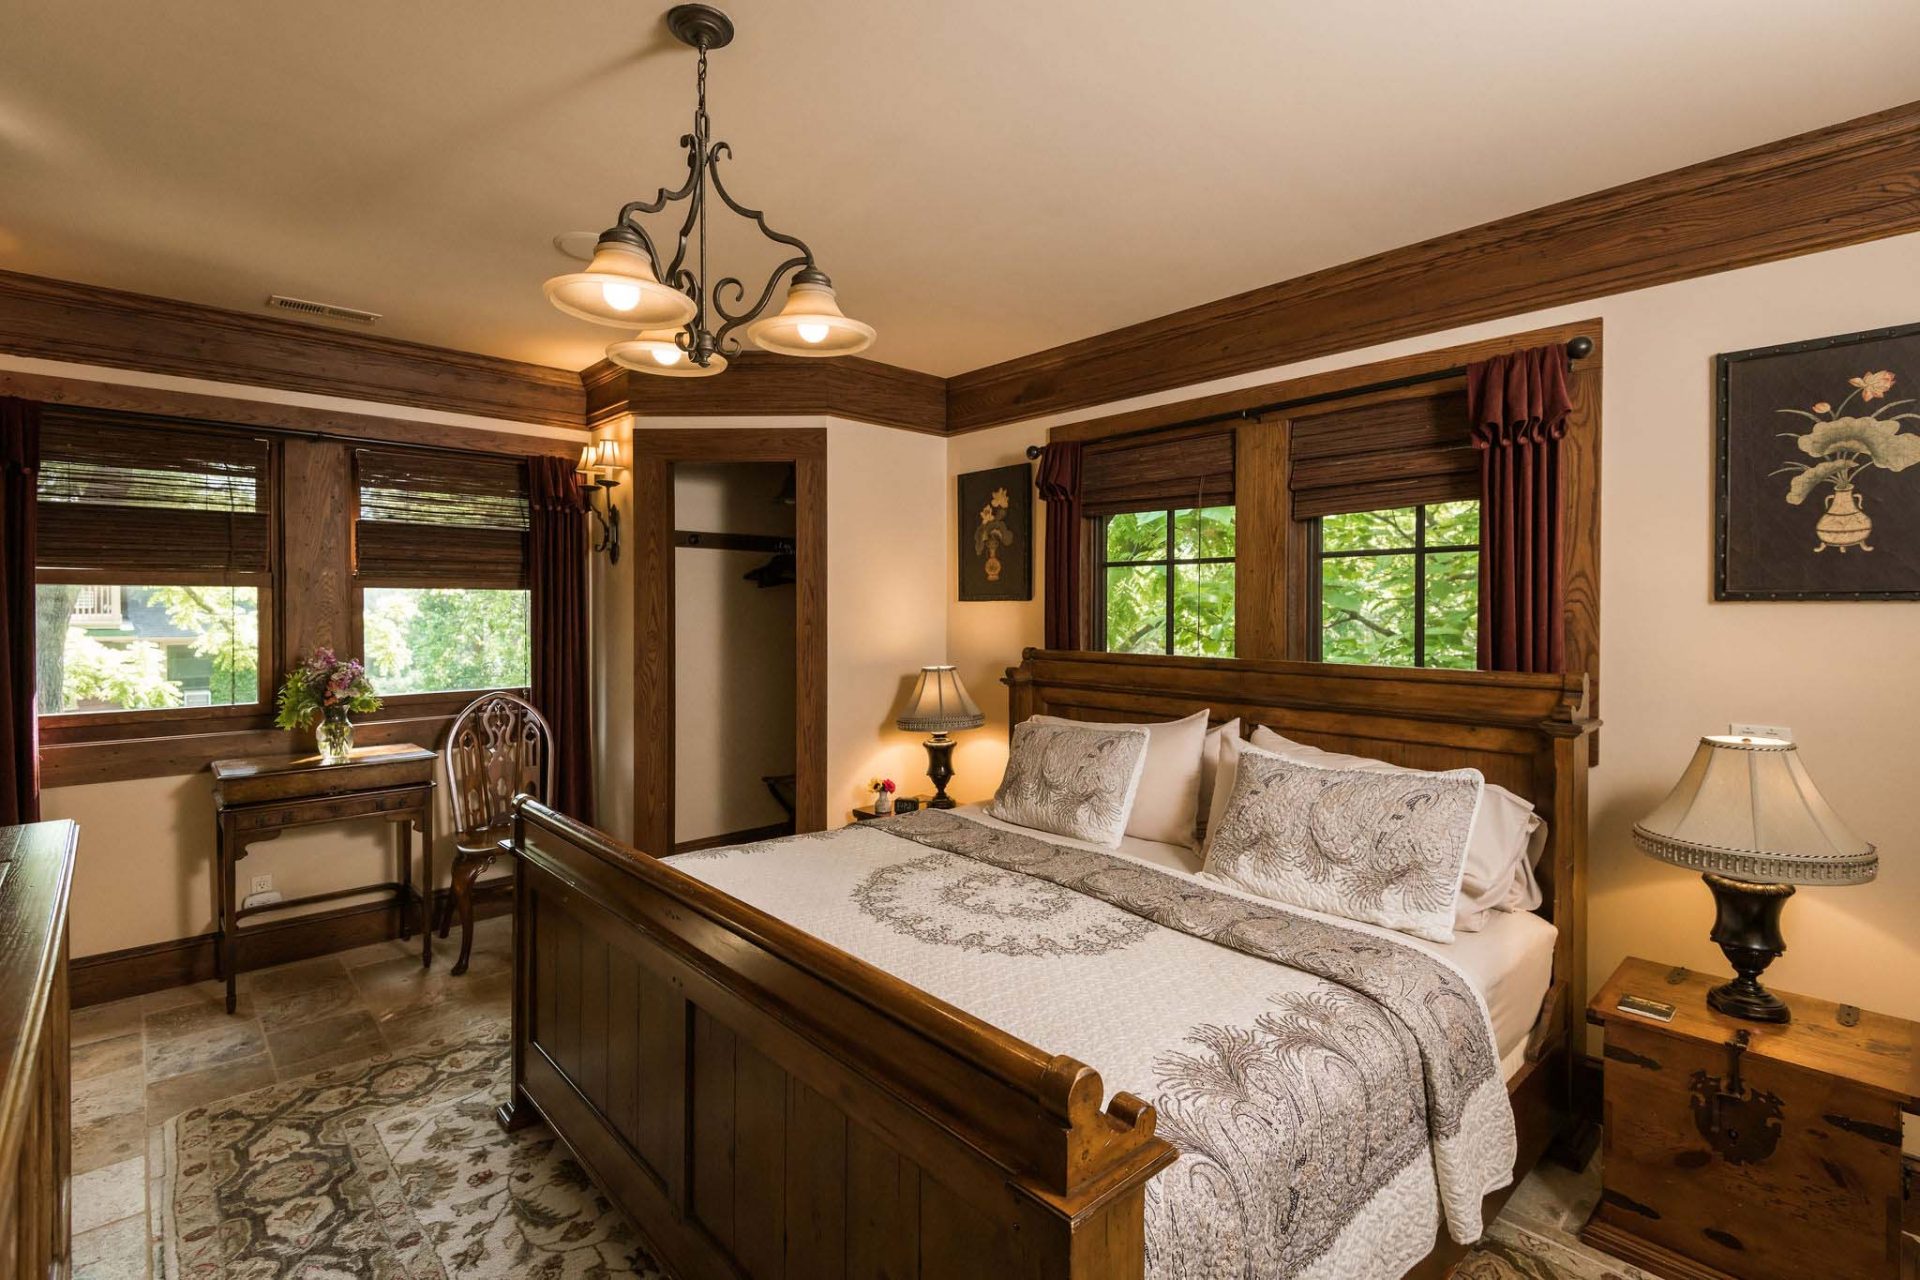 A dark wooden king bedroom with bing windows on two walls, a walk-in closet, two night stands and lamps.